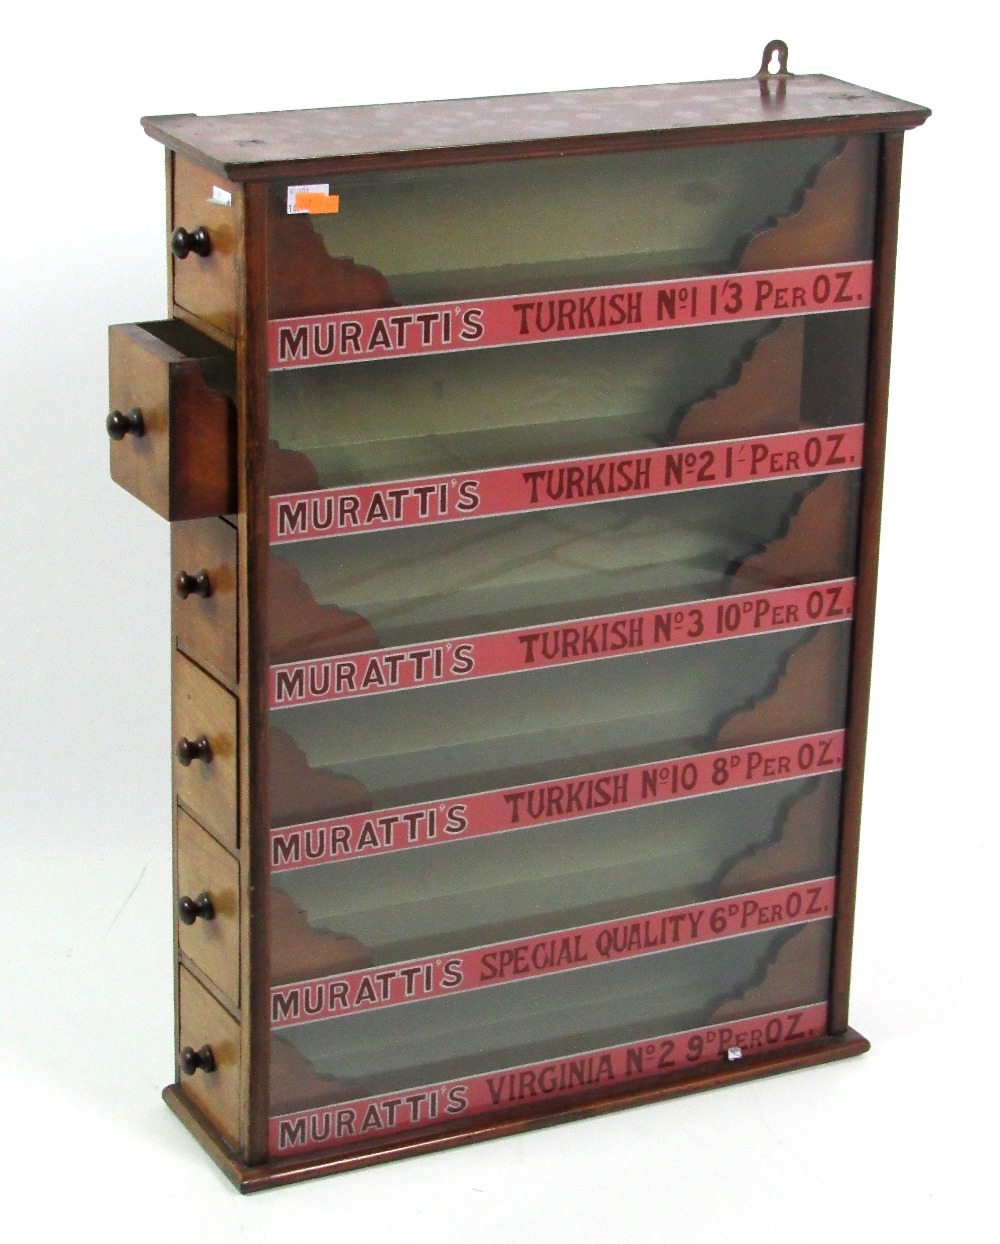 A rare "Murattis Cigarettes" mahogany Shop Display Case, with sliding doors and painted text.